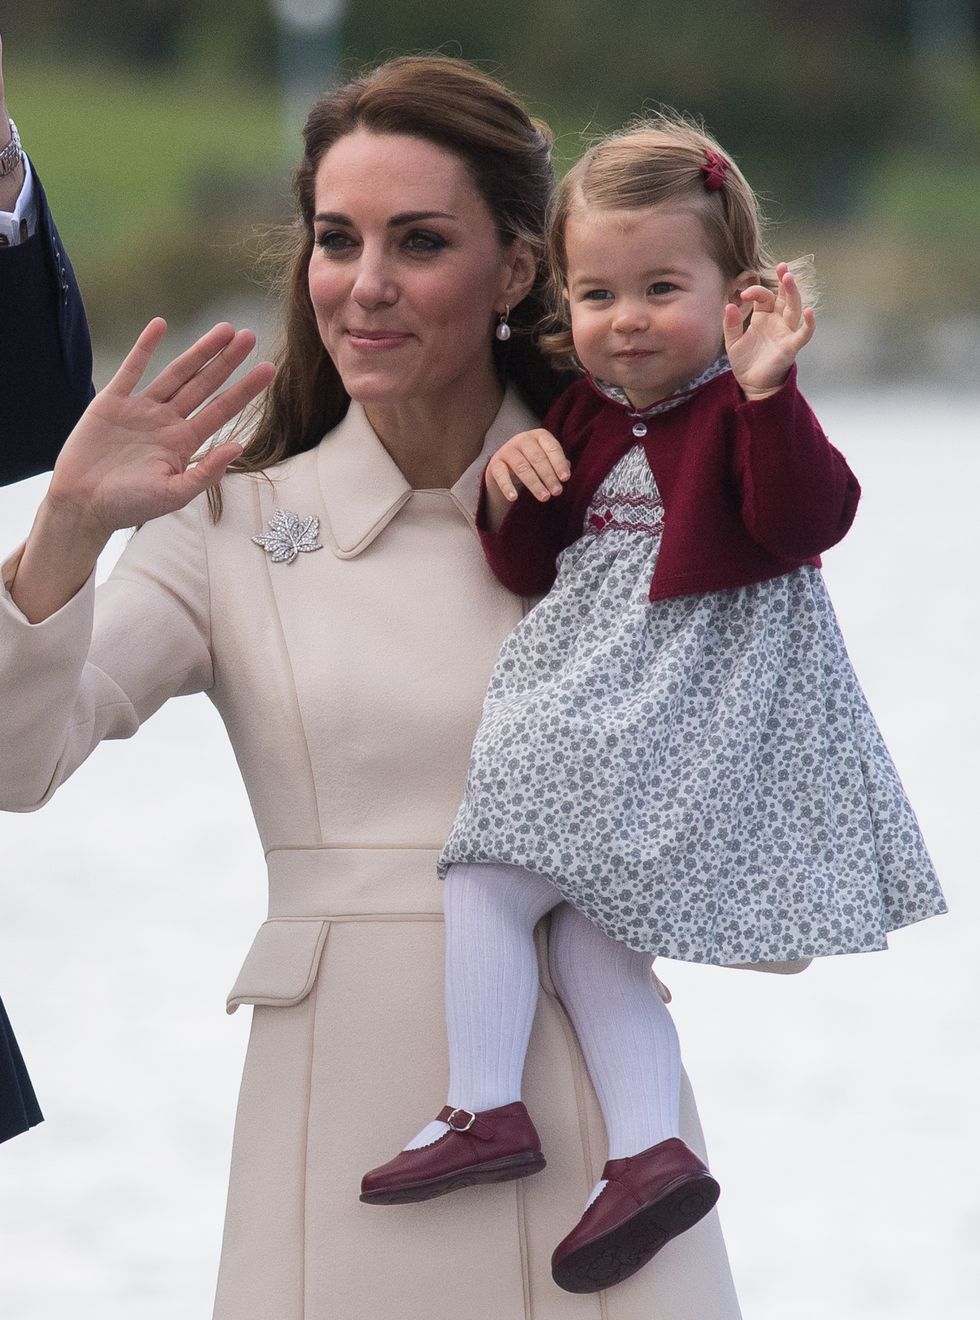 2016 royal tour to canada of the duke and duchess of cambridge victoria, british columbia